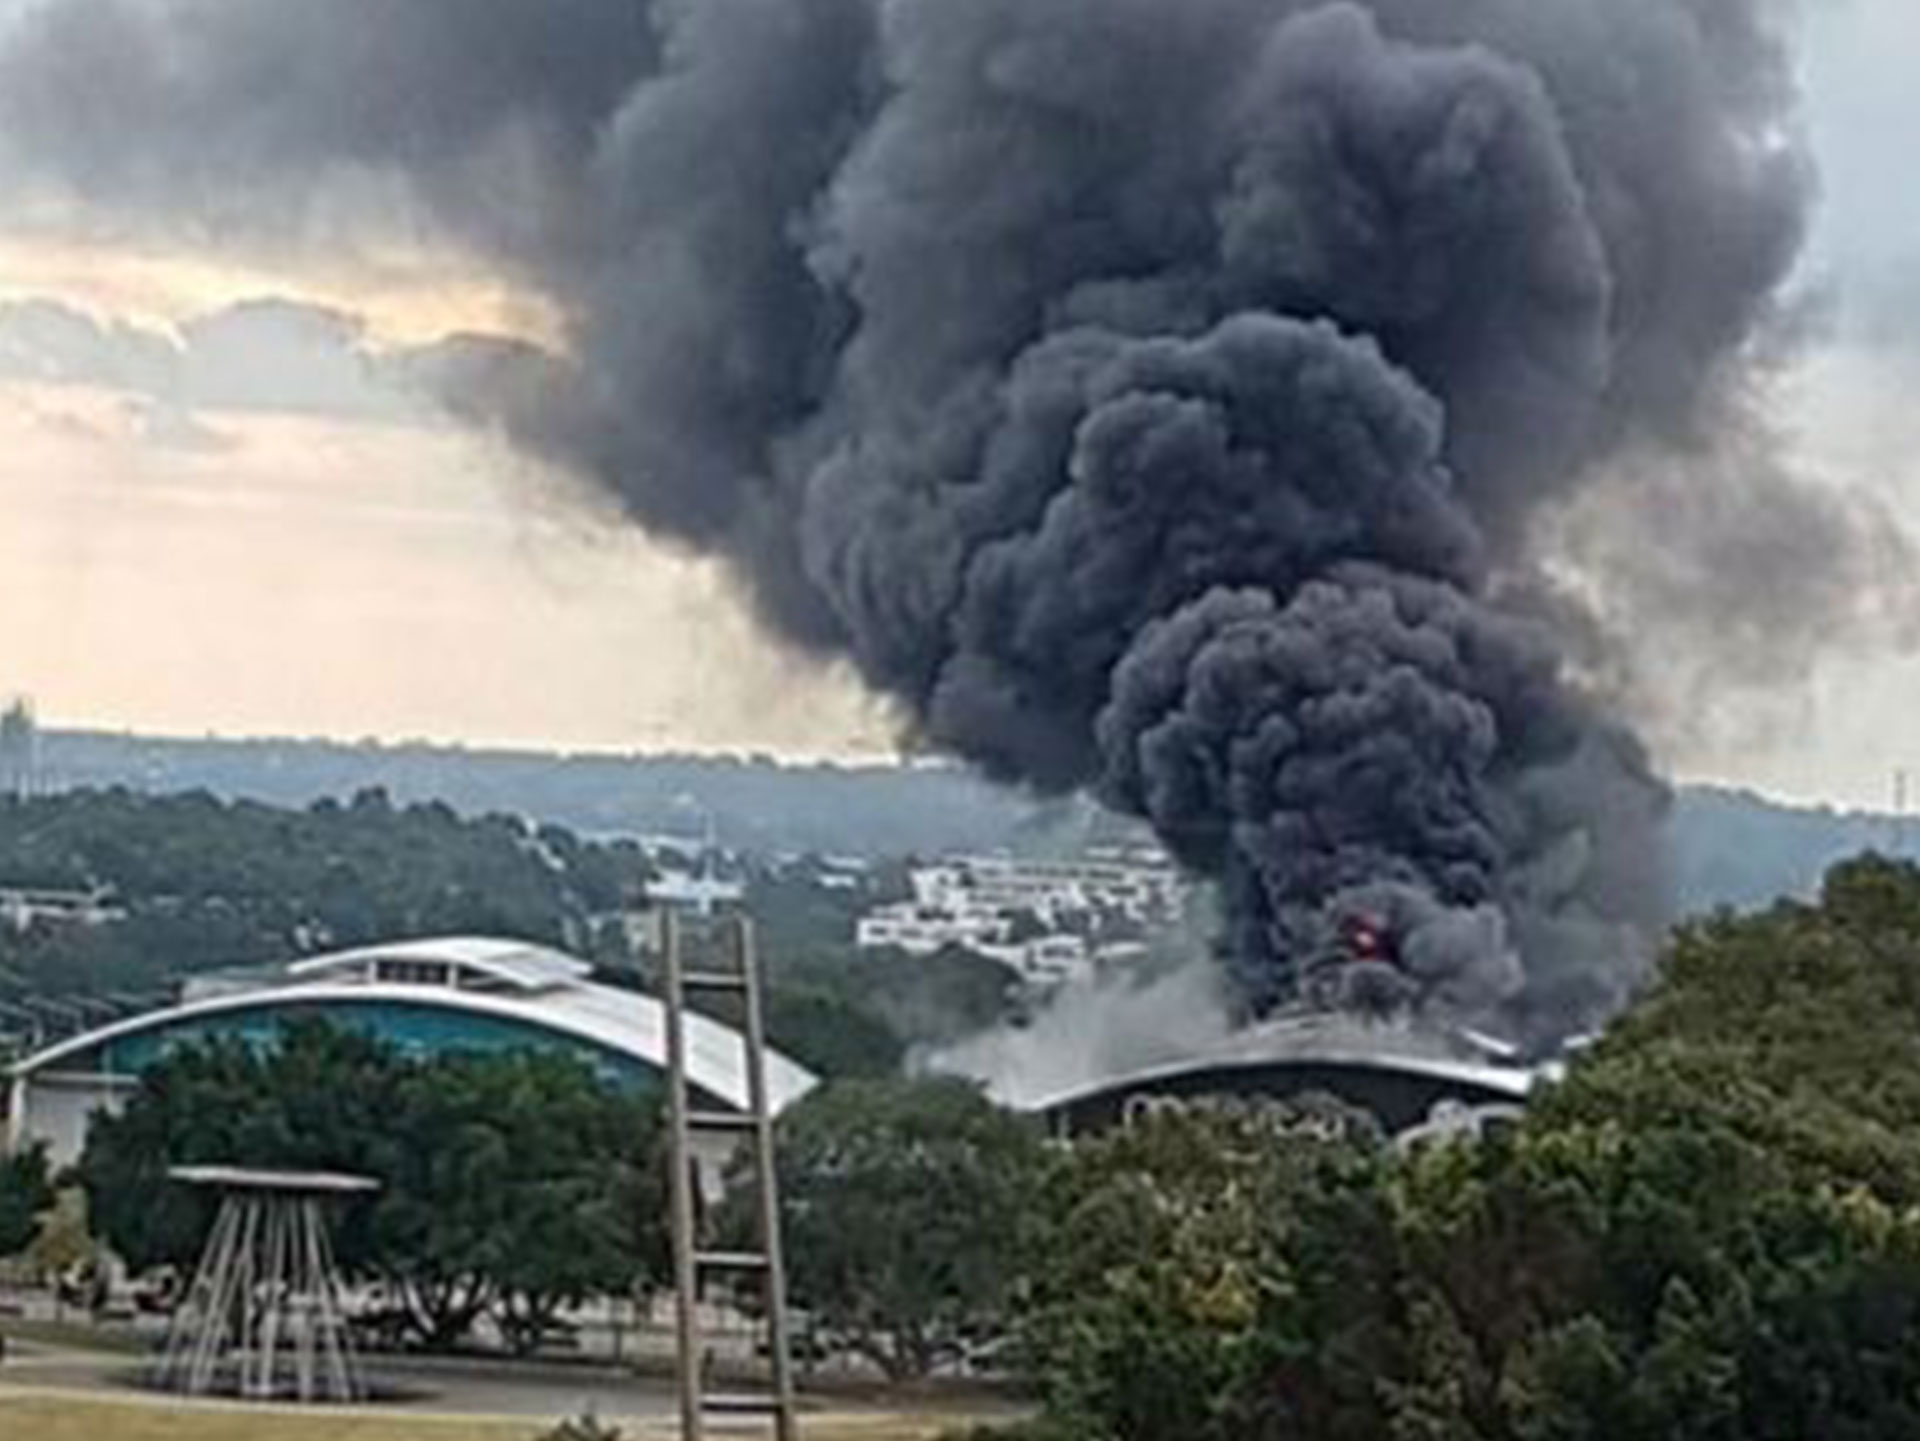 BREAKING: Massive fire breaks out at Sydney Olympic Park